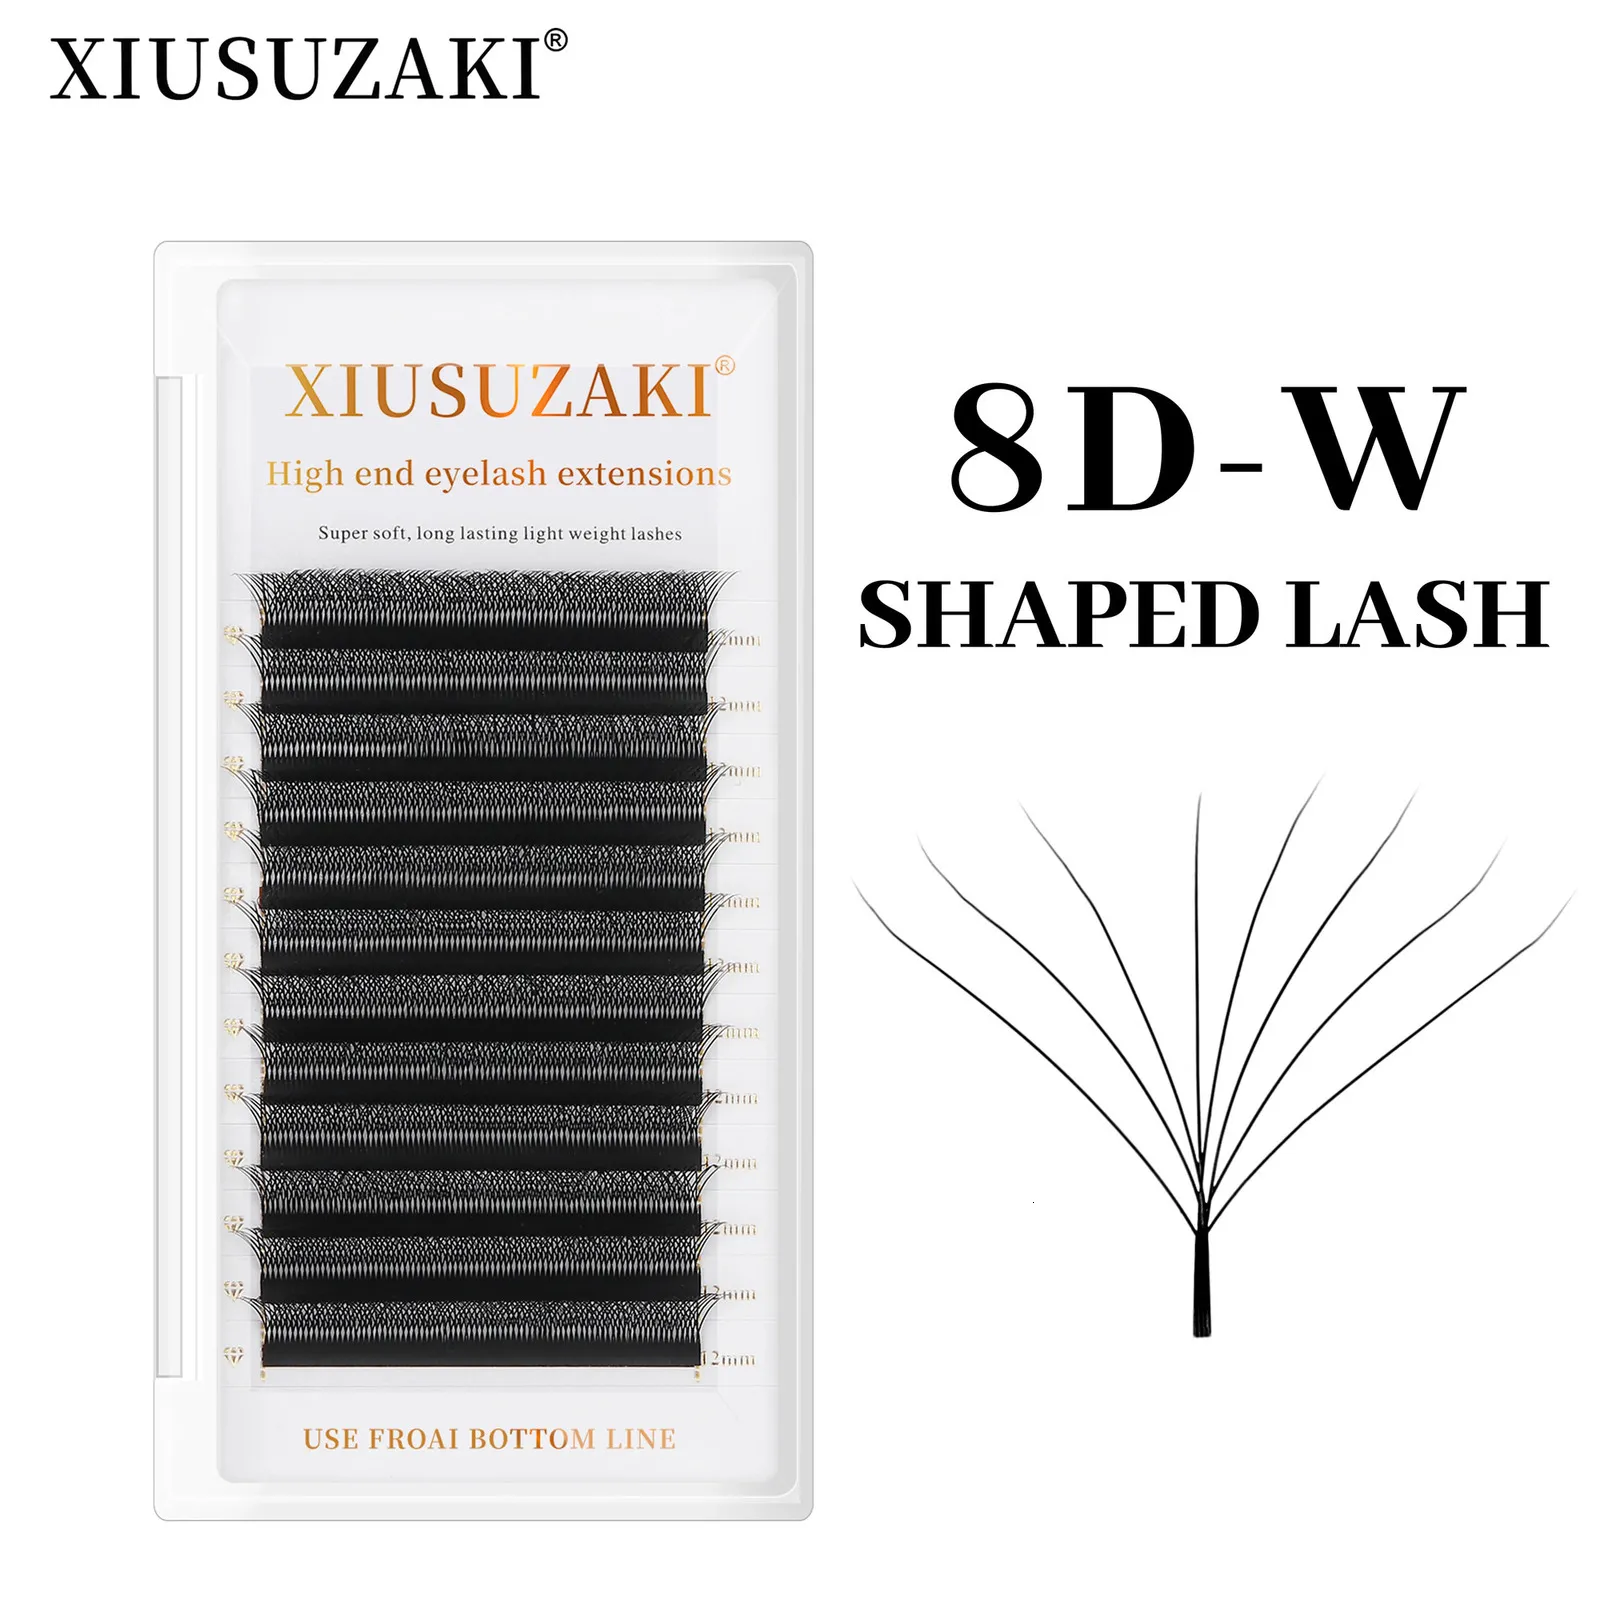 XIUSUZAKI 8D W Shaped Bloom Automatic Flowering Premade Fans Eyelashes s Natural Soft Light High Idividual Lashes 240130